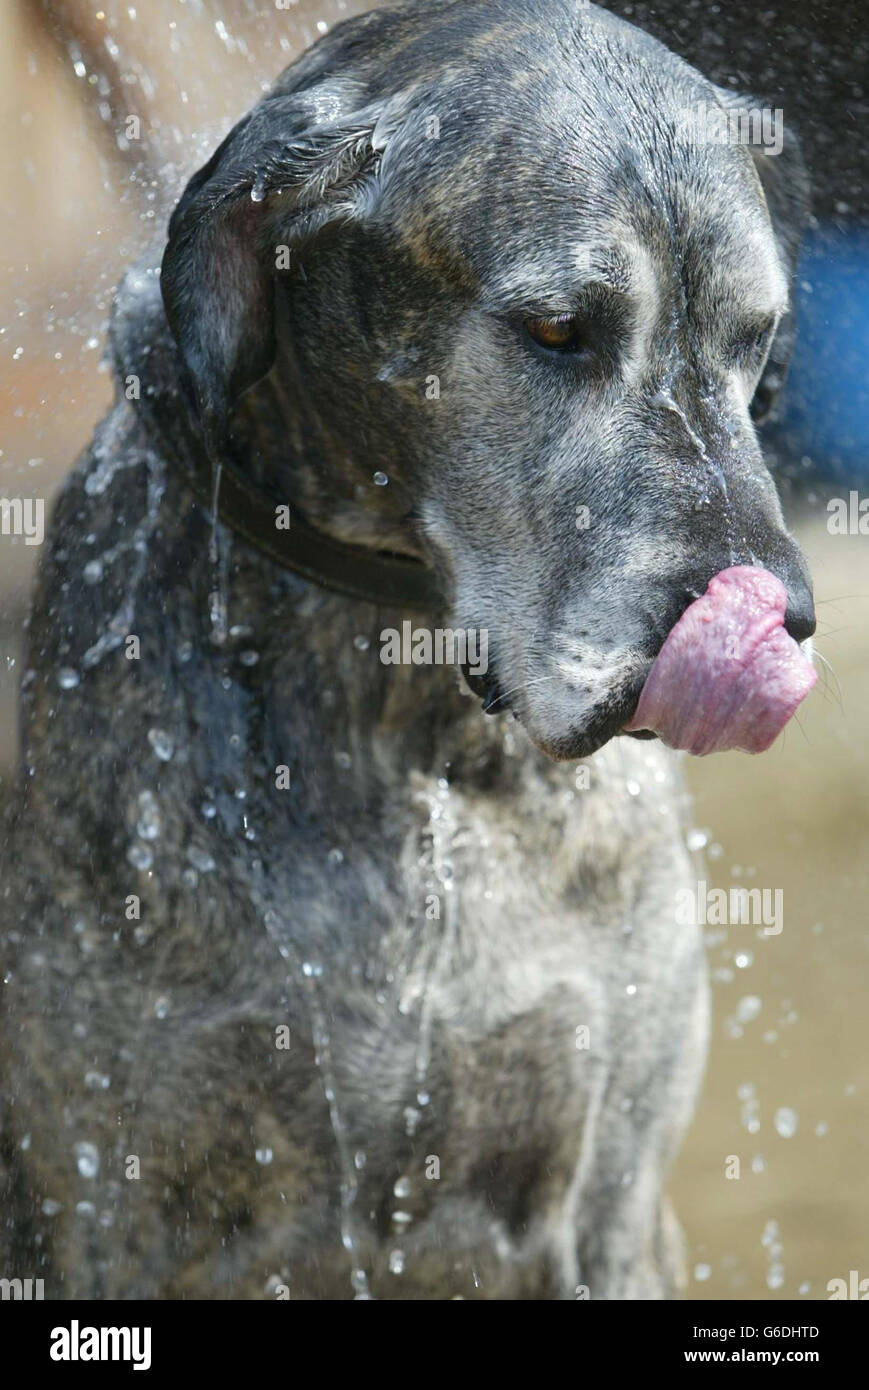 Karla the Great Dane enjoys a bath at her home in Cambridgeshire to cool down as the temperture soars. Stock Photo